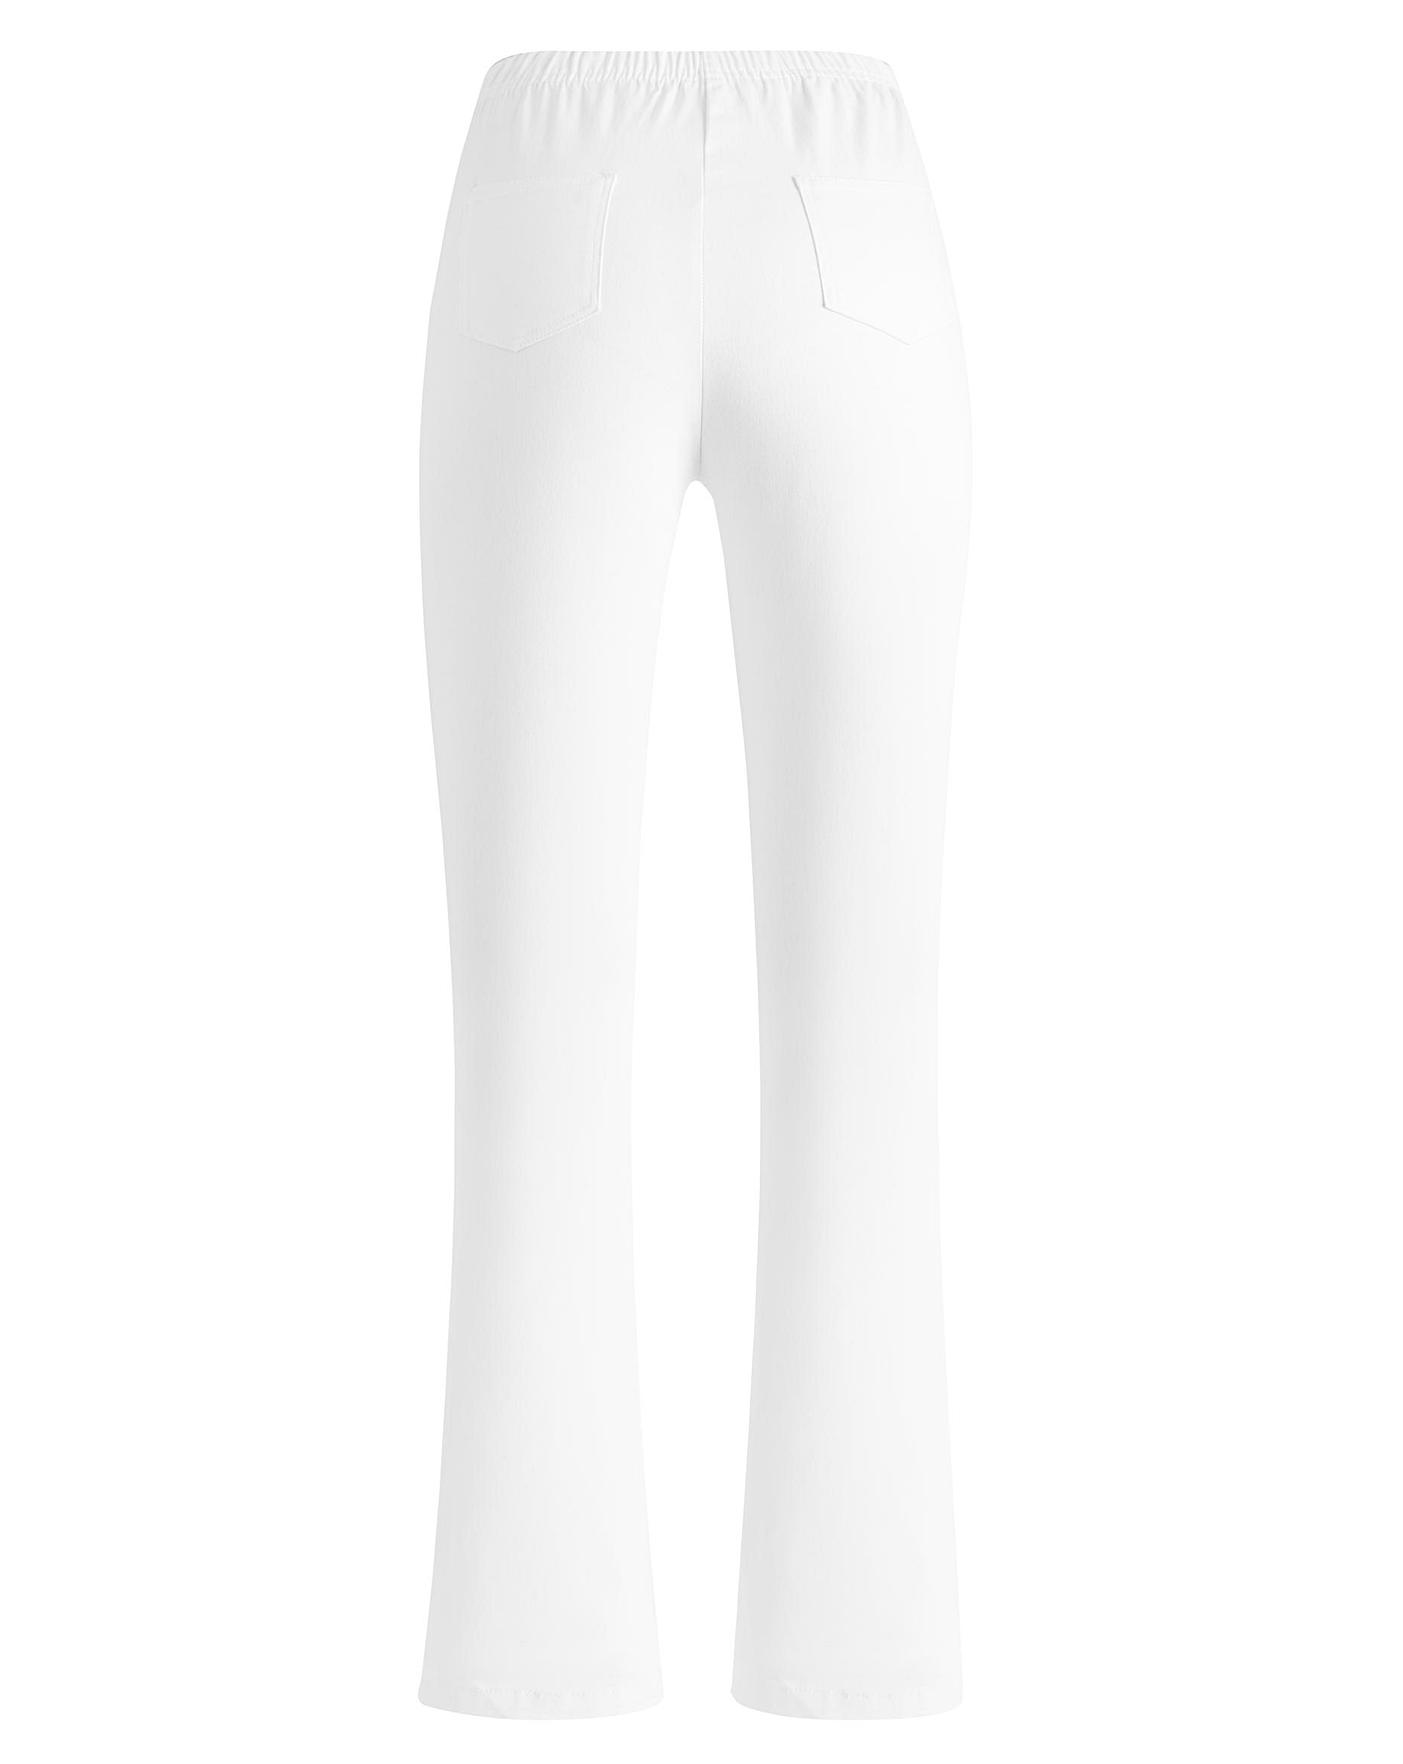 womens bootcut jeggings